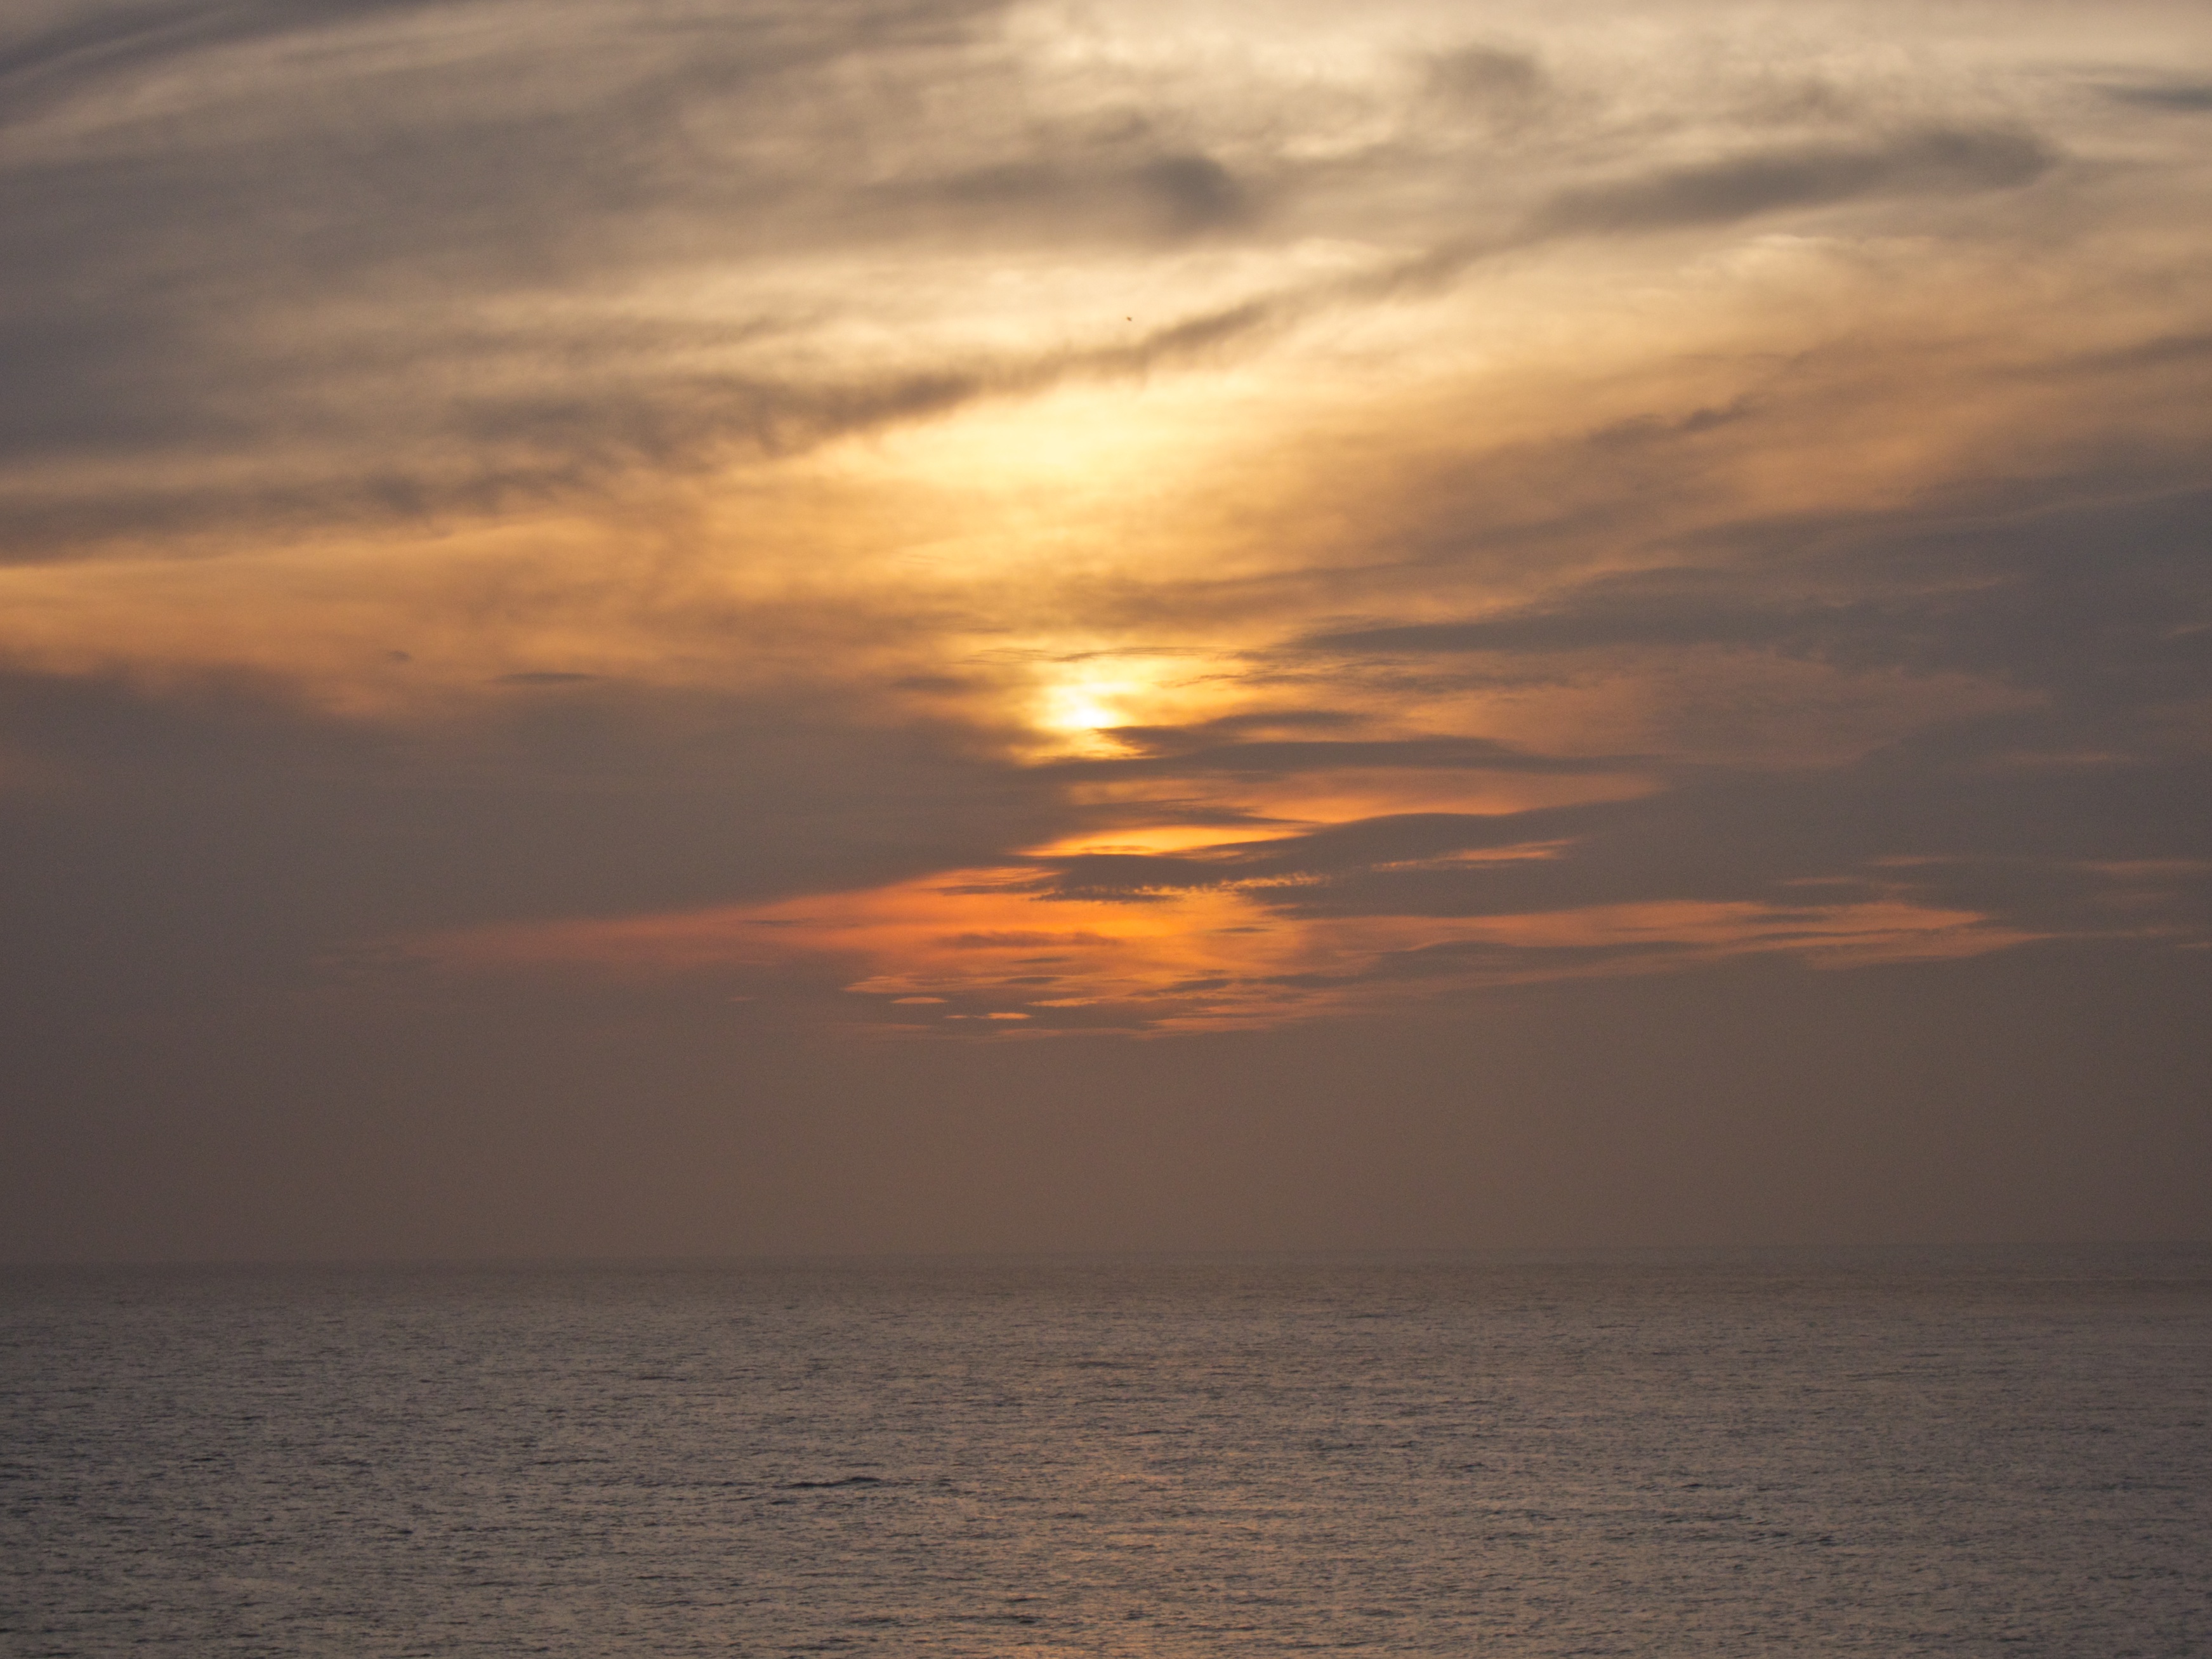 Day 163 - Sunset Over Sea